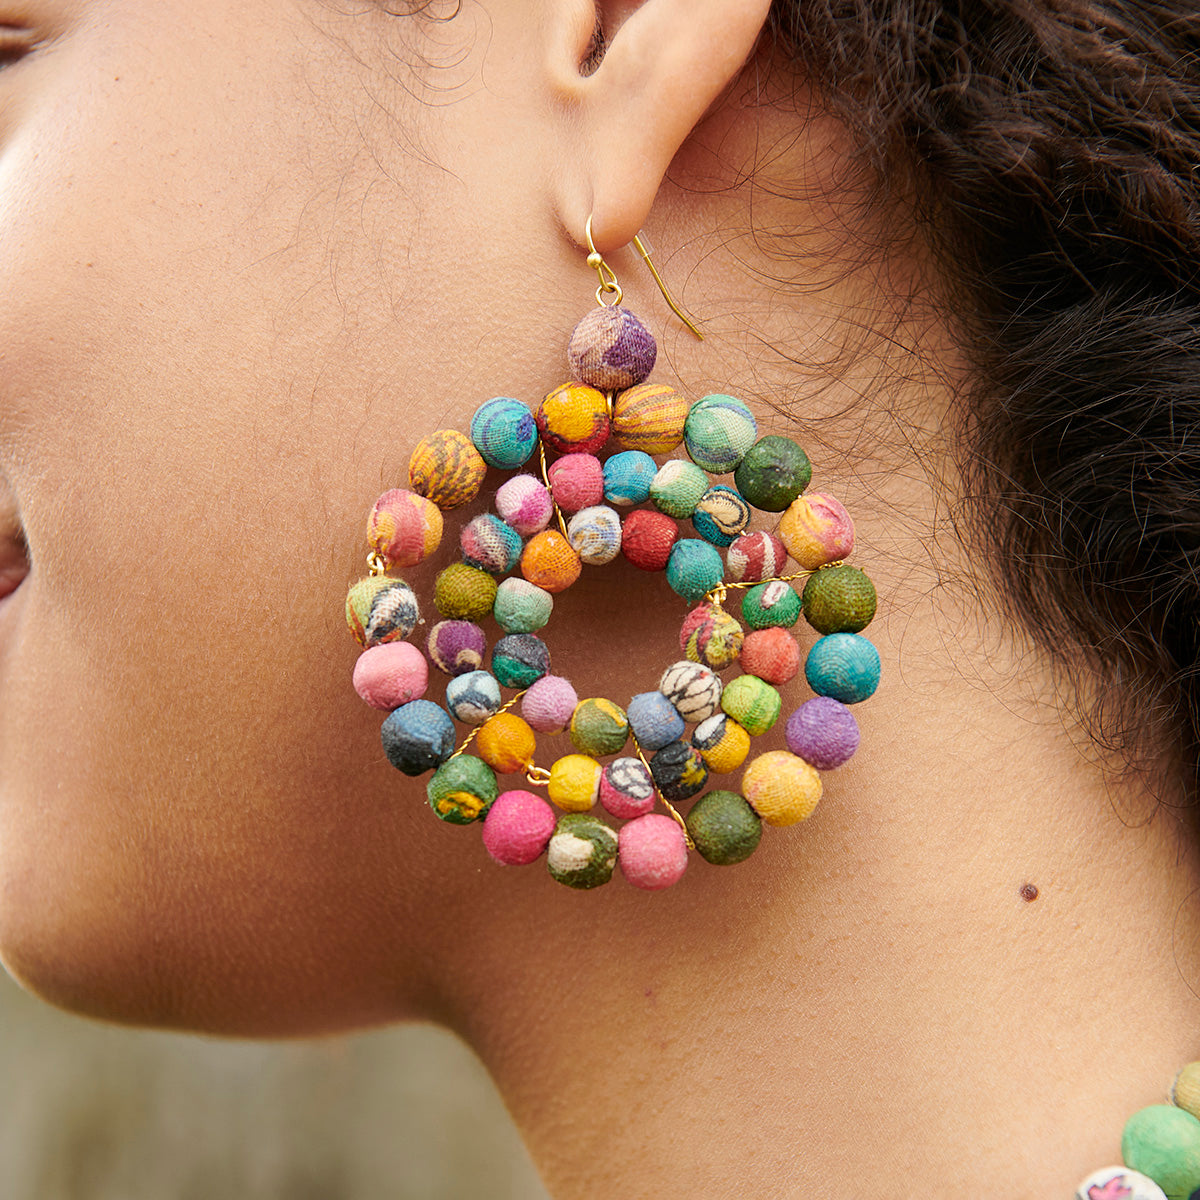 Angelco Accessories concentric kantha earrings as worn by model in close up view